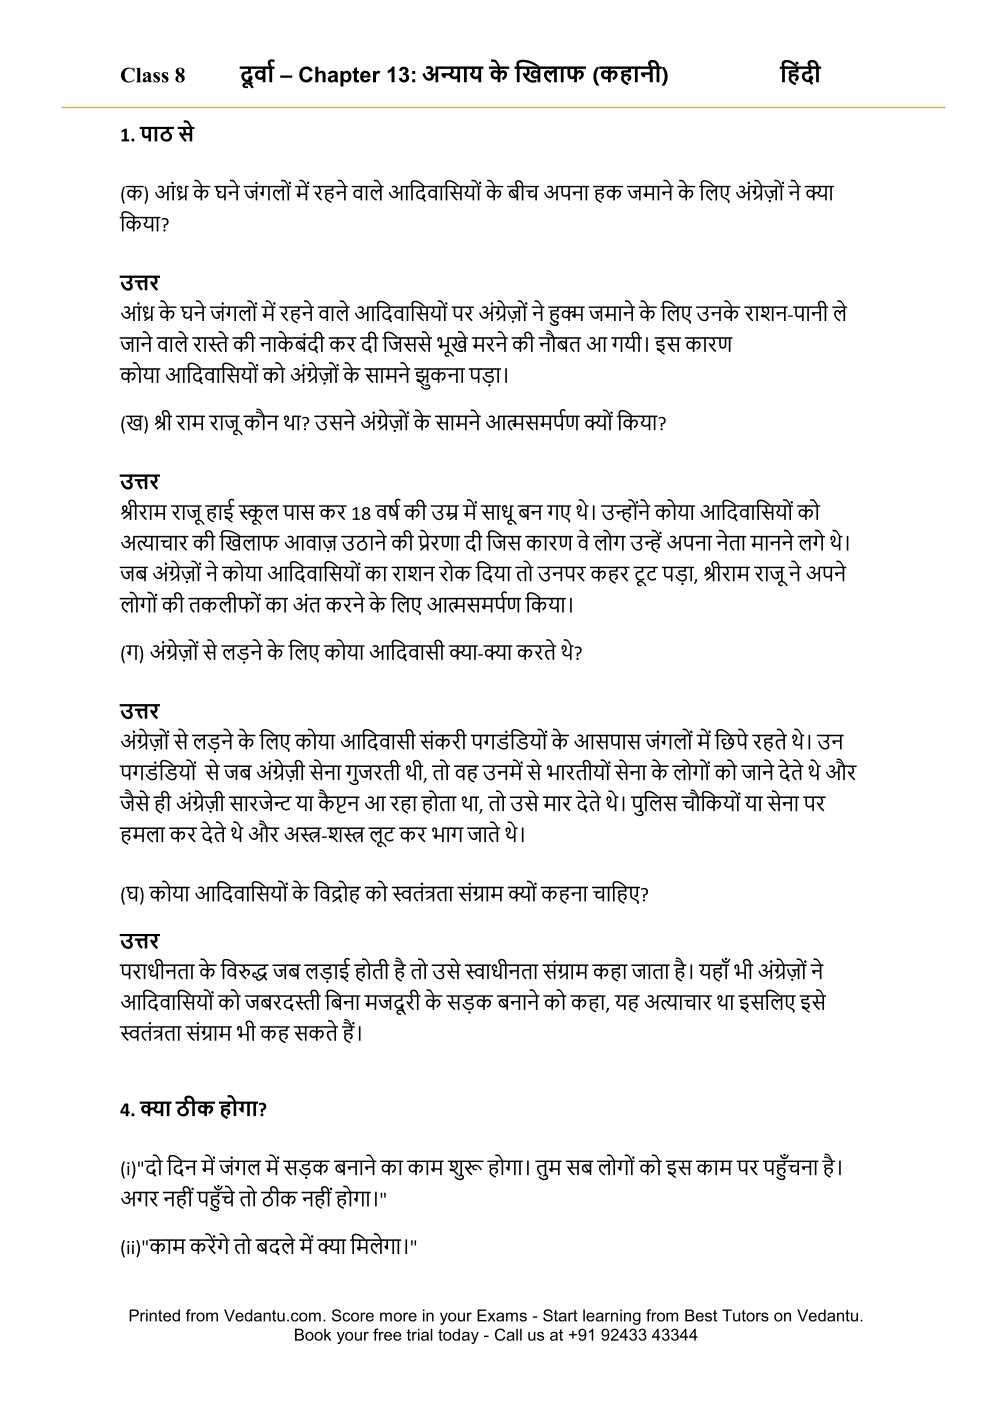 NCERT Solutions For Class 8 Hindi Durva Chapter 13